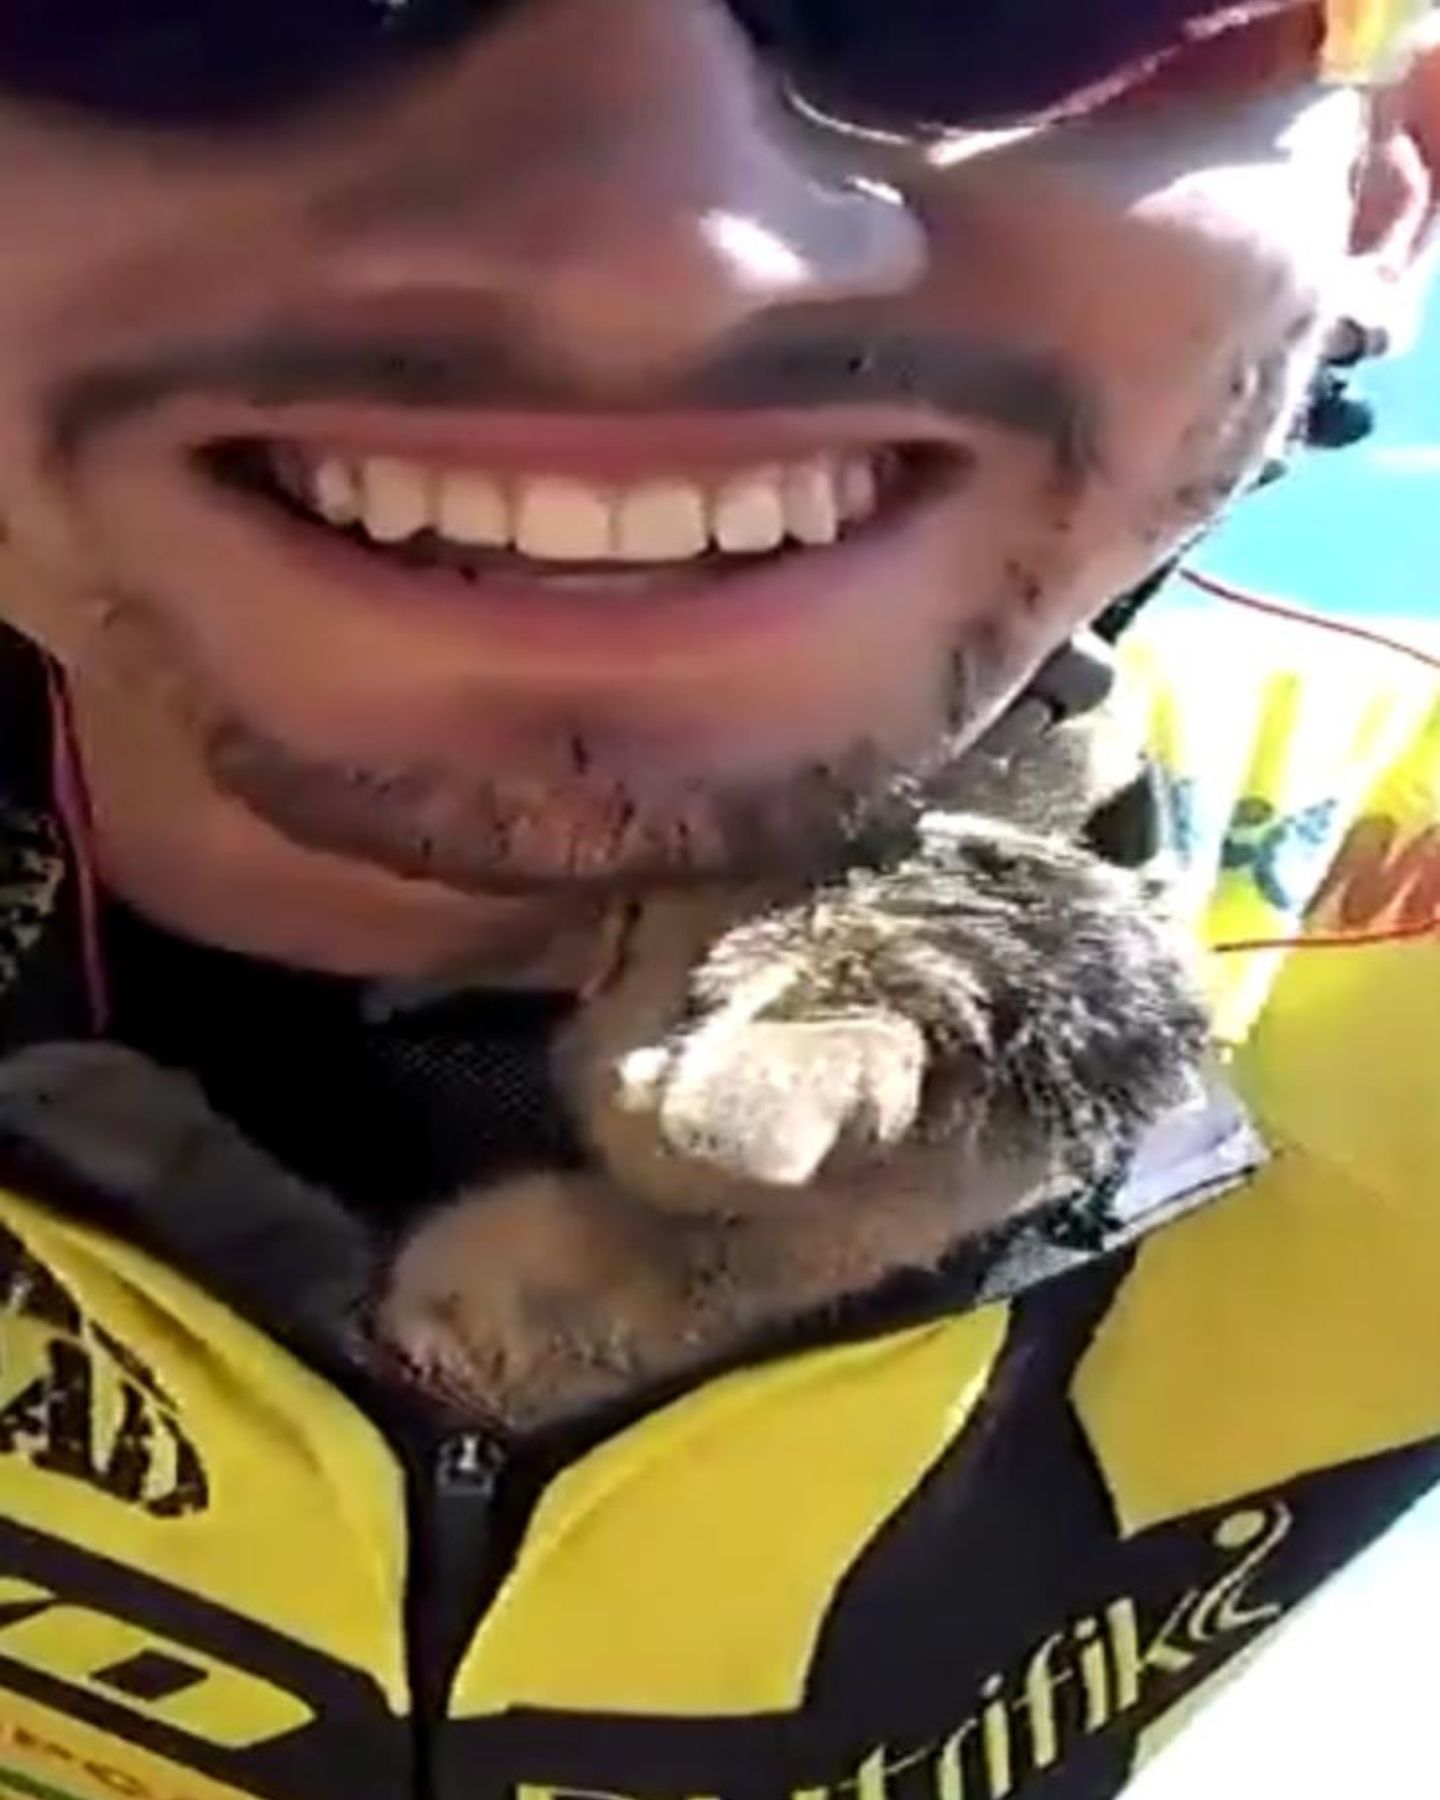 kitten with cyclist on bike